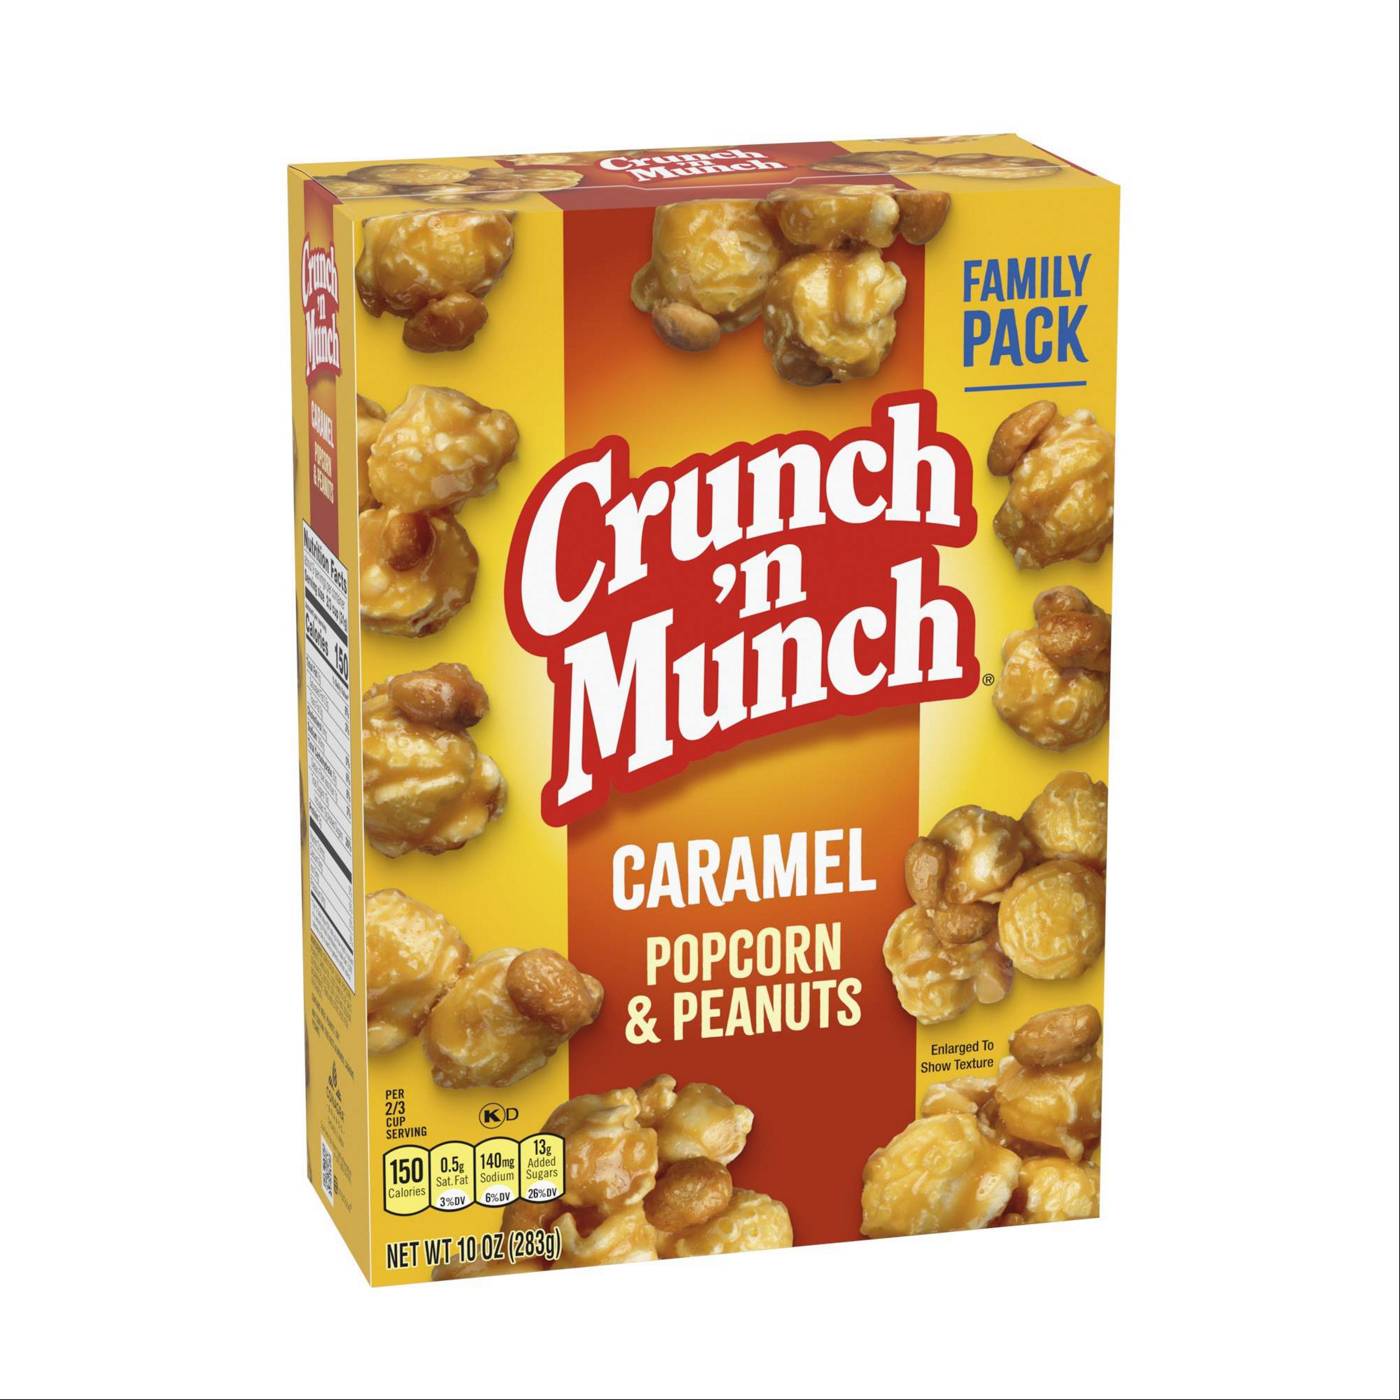 Crunch 'n Munch Caramel Popcorn with Peanuts; image 4 of 4